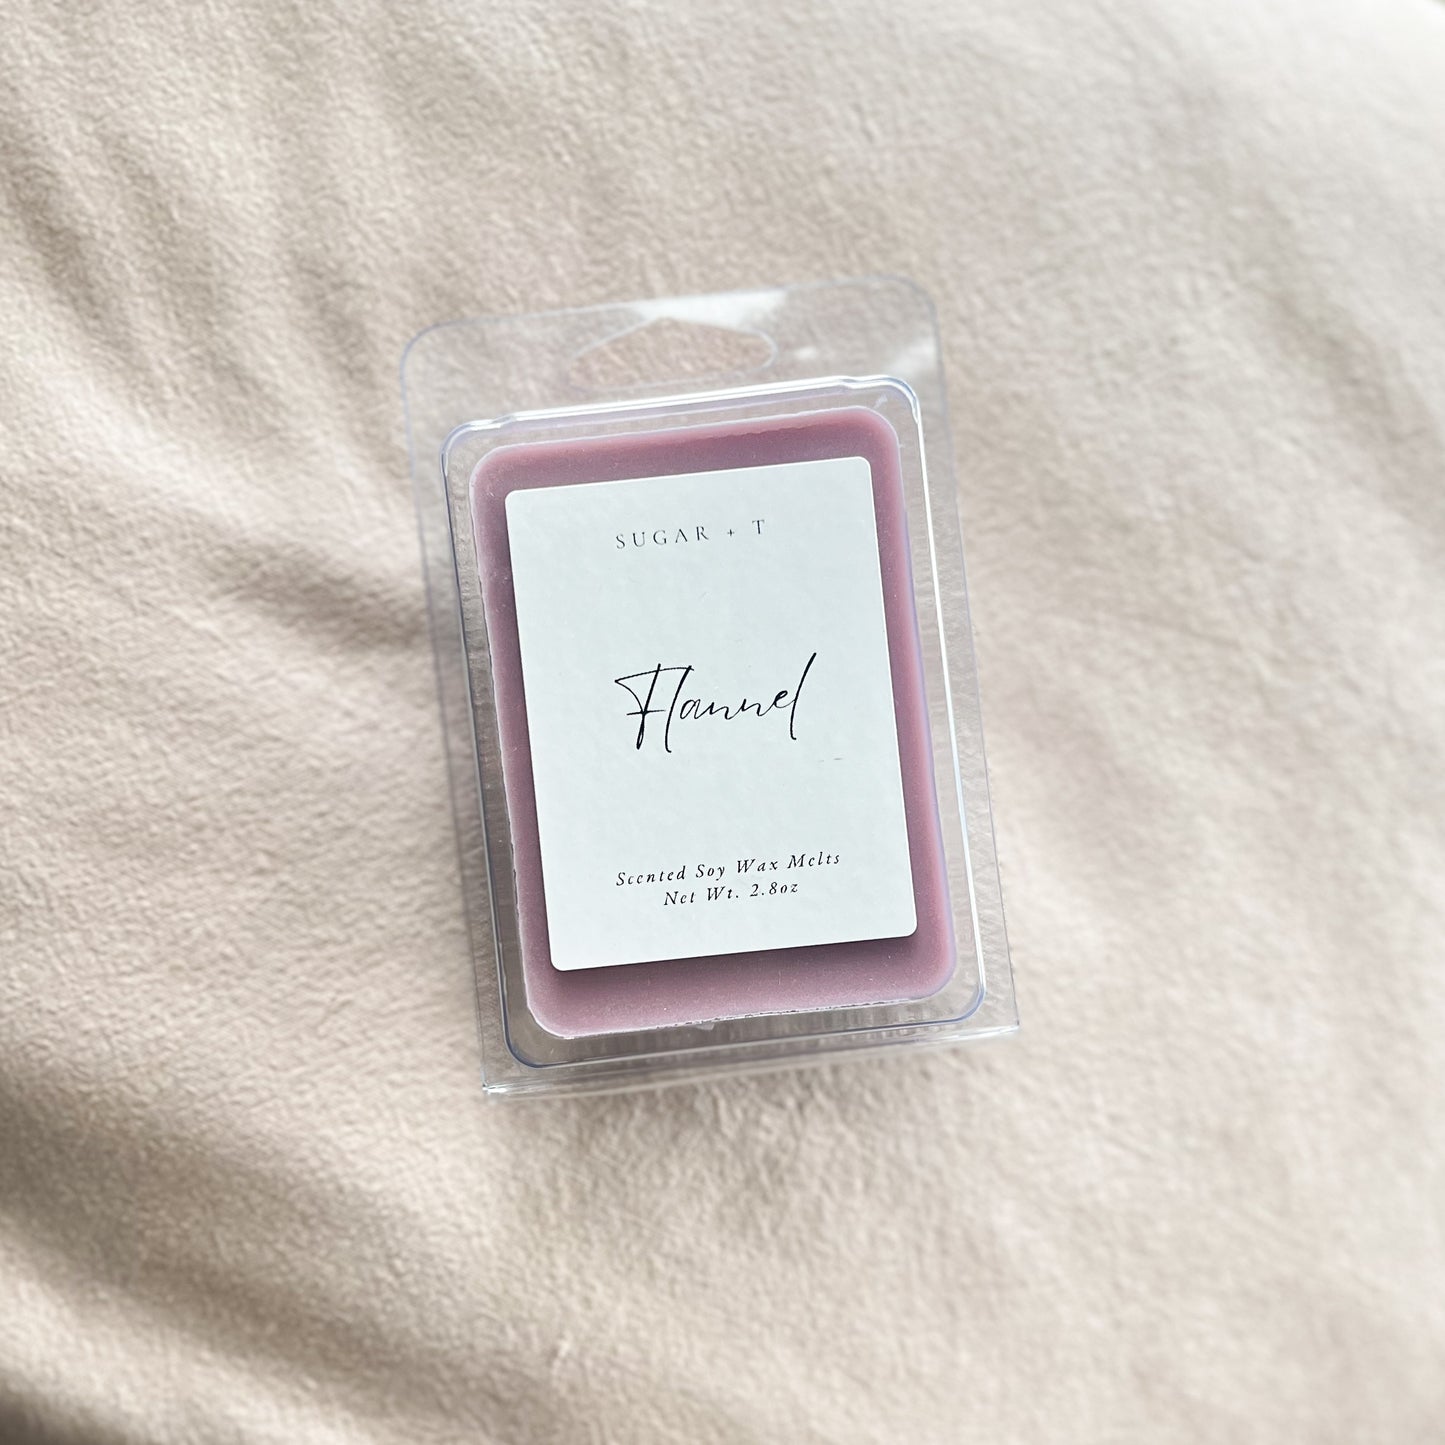 Flannel Scented Wax Melts